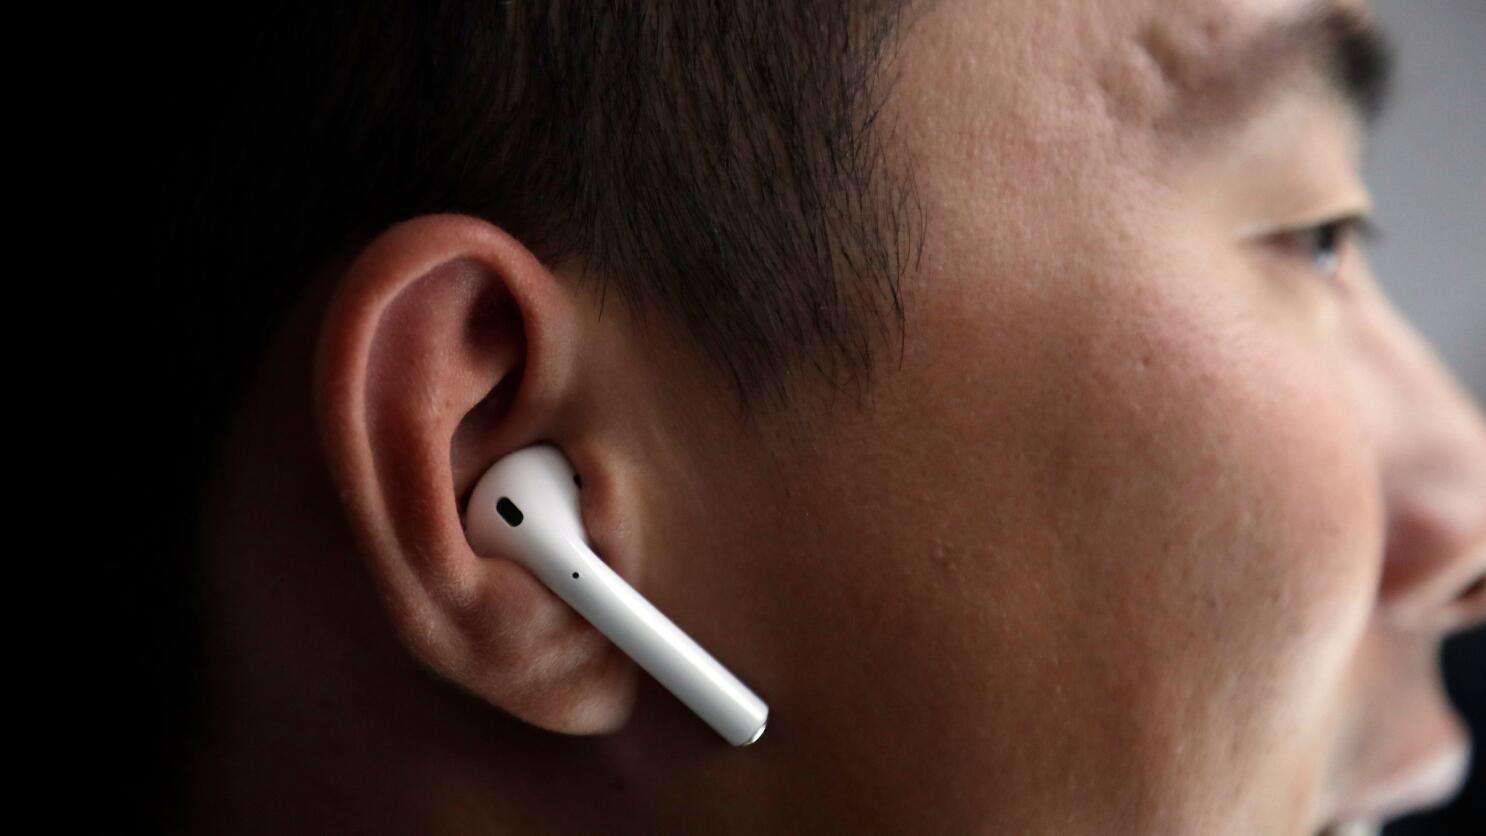 Are Airpods Safe?